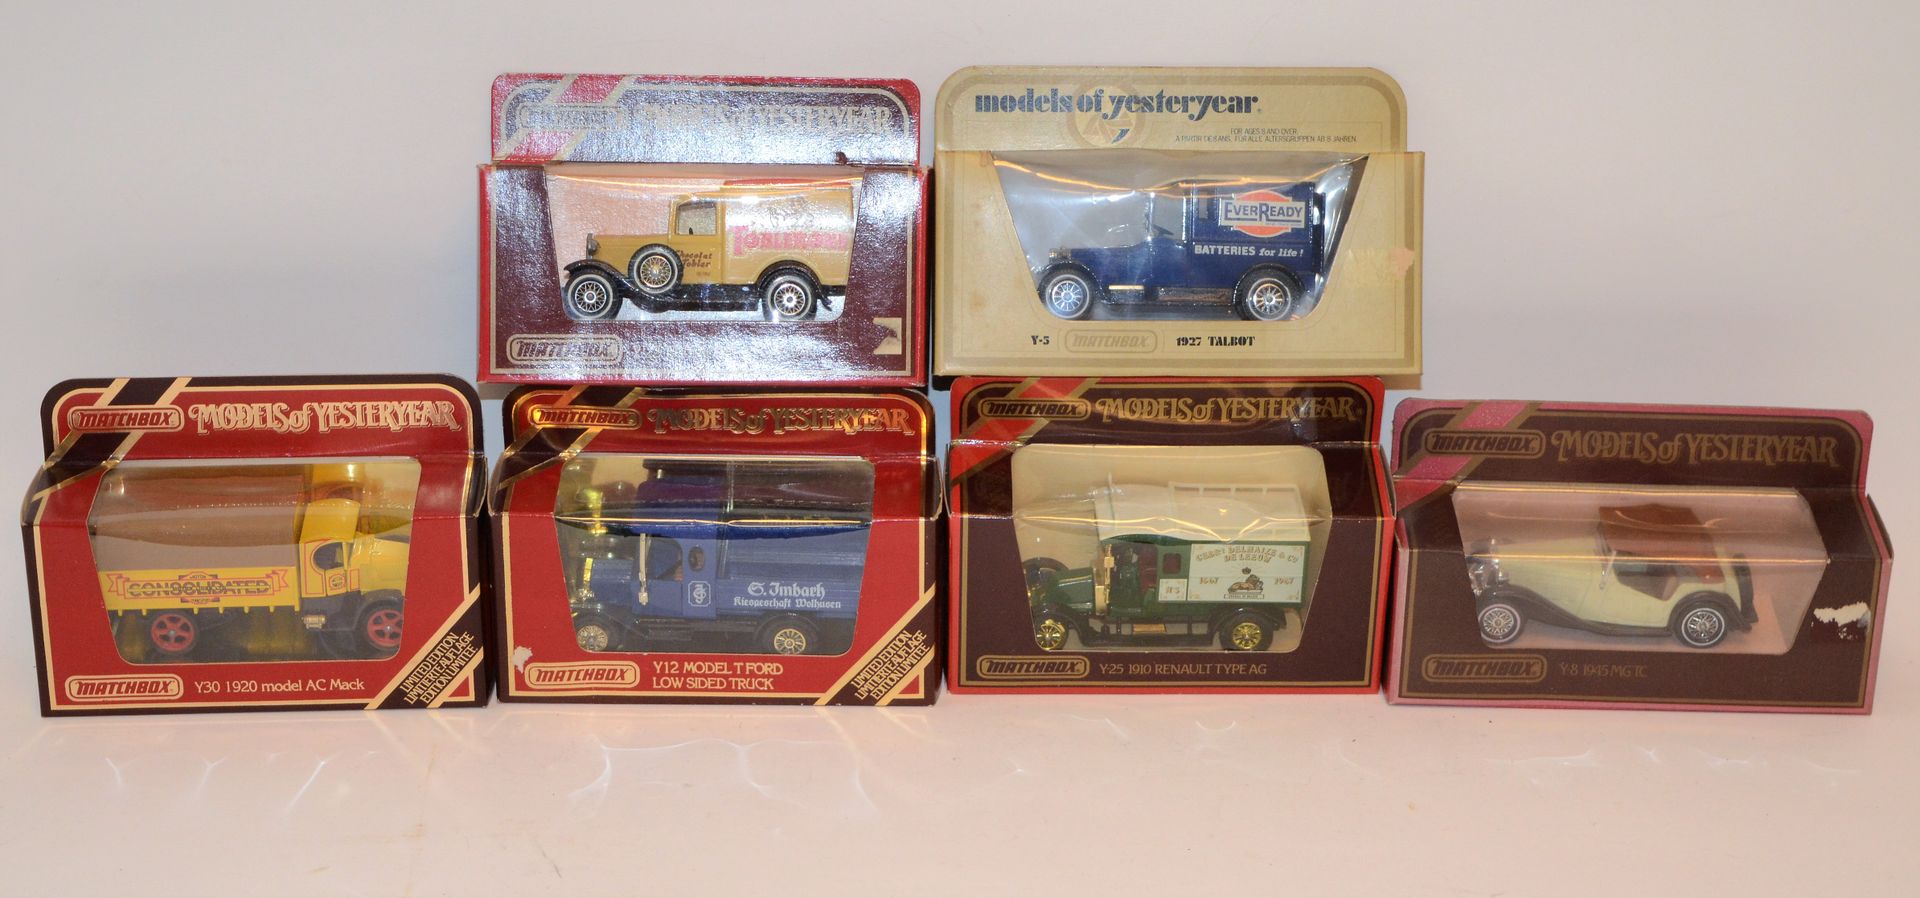 Null MATCHBOX 6 Models of yesteryear new in box:

-Y-25 Renault type AG, 1910

-&hellip;